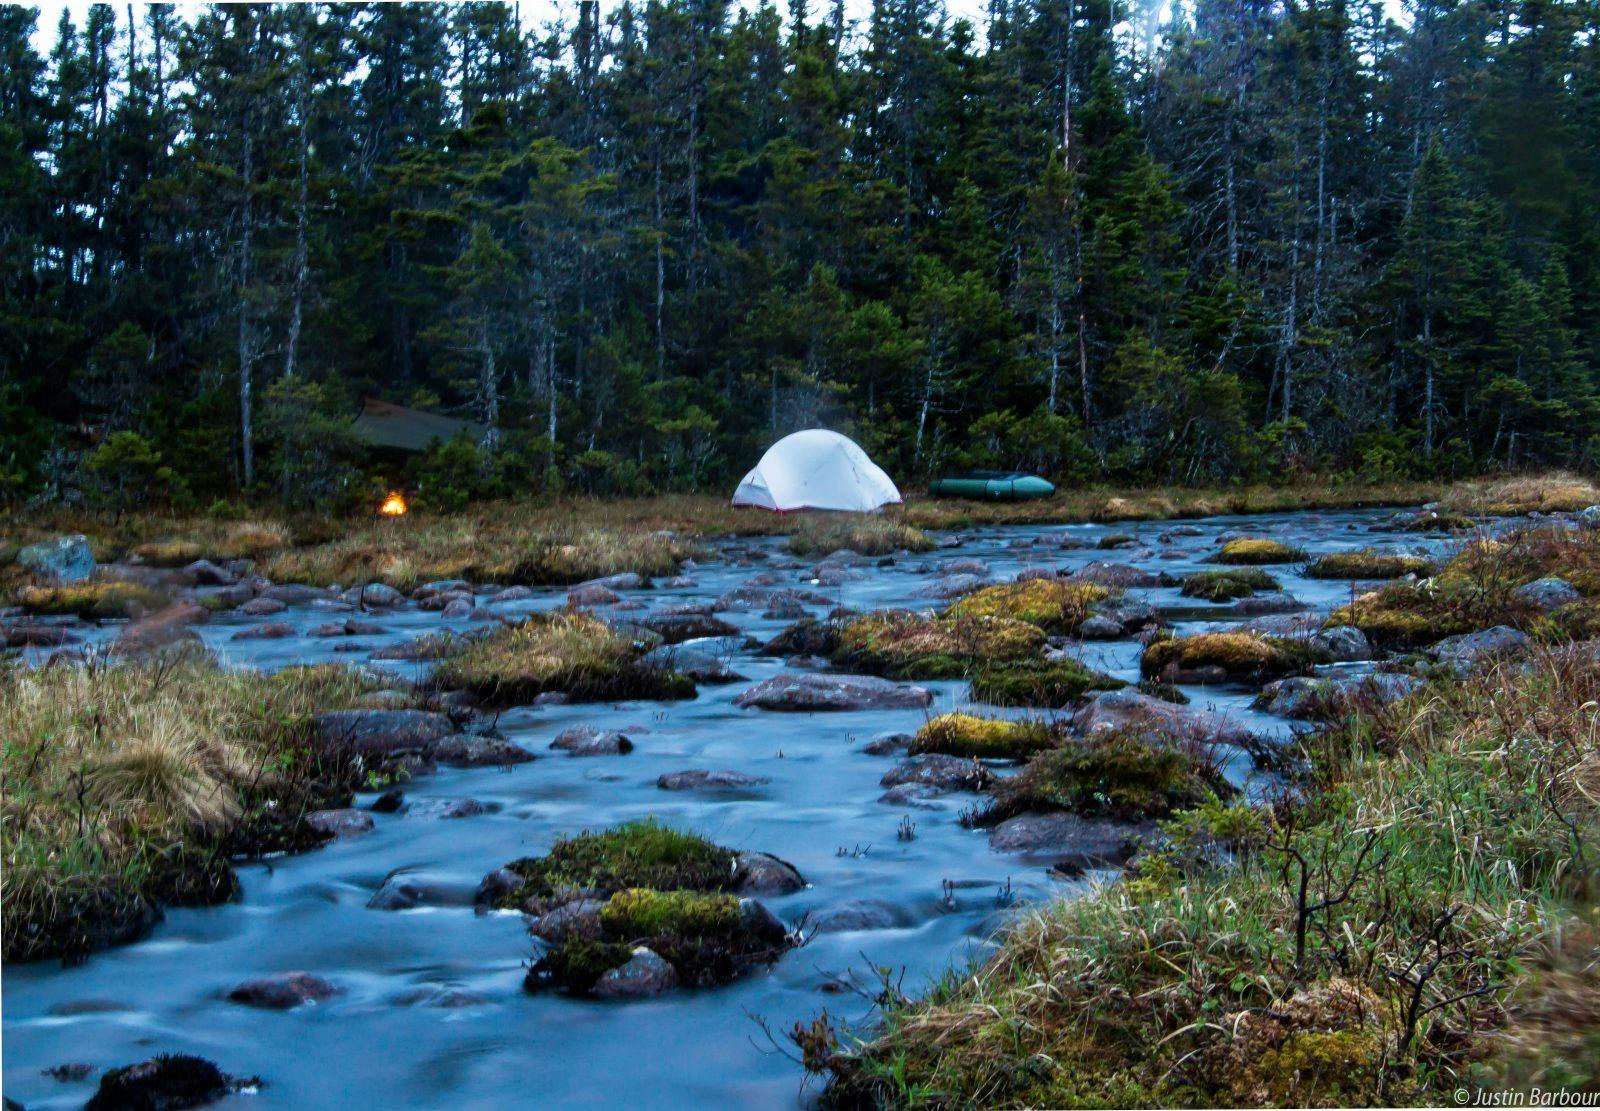 &#x201C;Home is where ever you want it to be. Having a camp near running water is soothing and mediative. It&#x2019;s where I sleep the best. This photo is of the Meta Pond area in Newfoundland&apos;s Bay Du Nord Wilderness Reserve. Minus the transmission line (that I despise) in the southern extremities, this place is still very wild and remote. It is a vast 2,895 square km paradise for the outdoor enthusiast, with prime opportunities for fishing, hunting, foraging, paddling, hiking, observing wildlife, and just living the dream. In my travels there I have seen very little sign of human disturbance. Let&apos;s try and keep it that way.&#x201D;